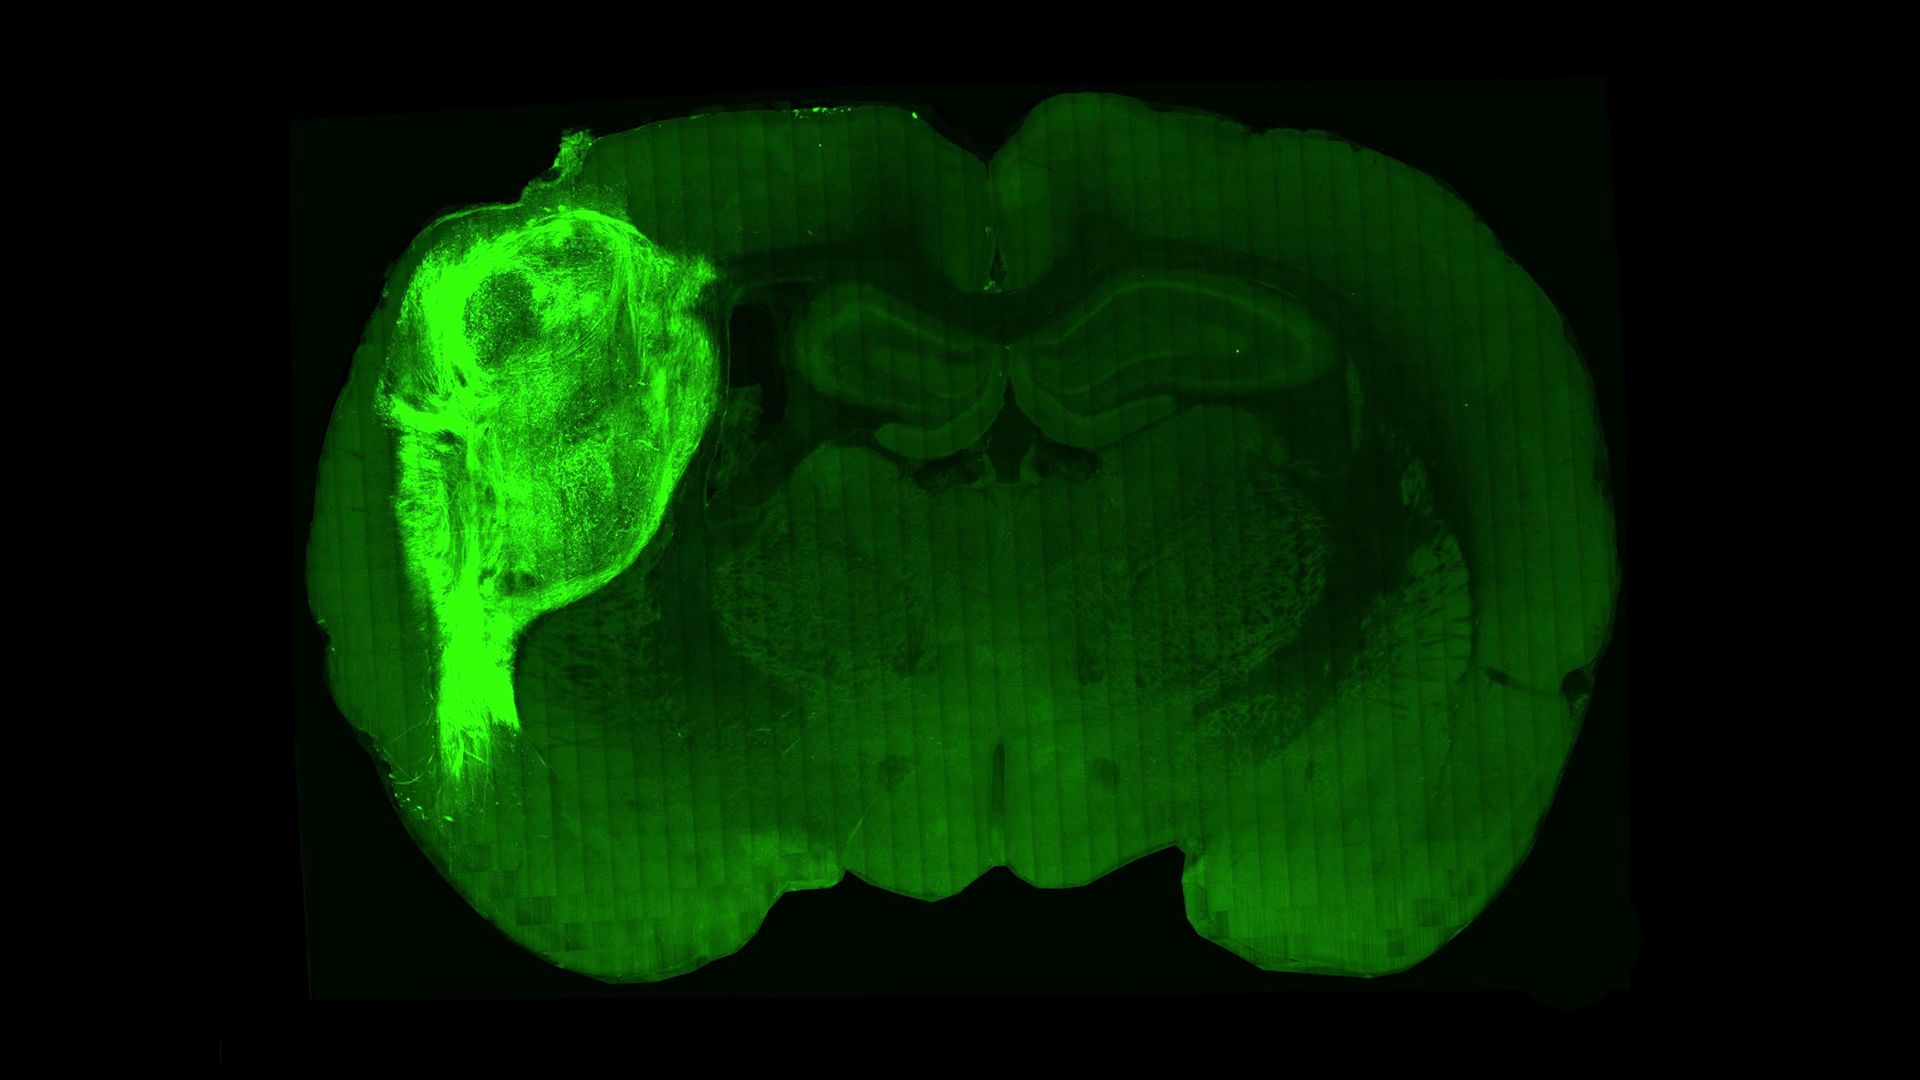 A transplanted human organoid labeled with a fluorescent protein in a section of the rat brain. Credit: Stanford University